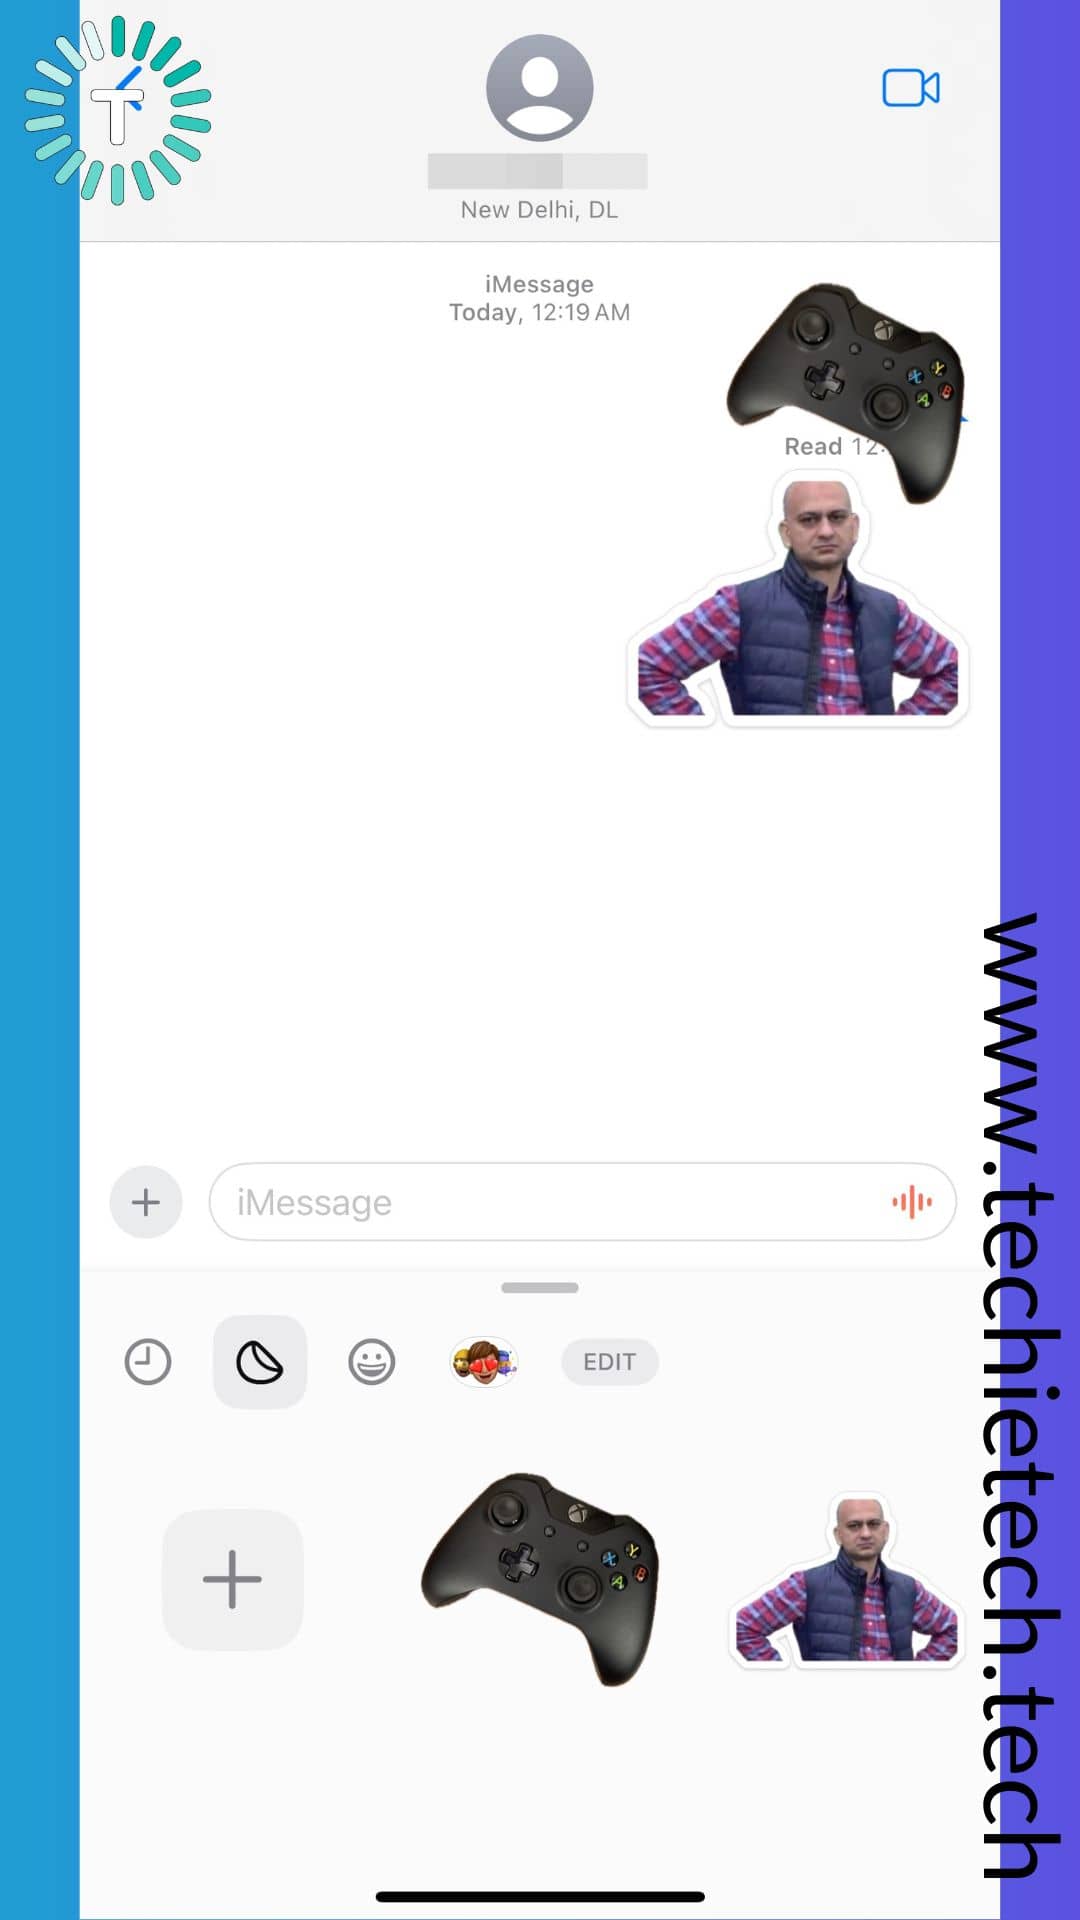 Drag and drop the sticker and paste it anywhere in the chat